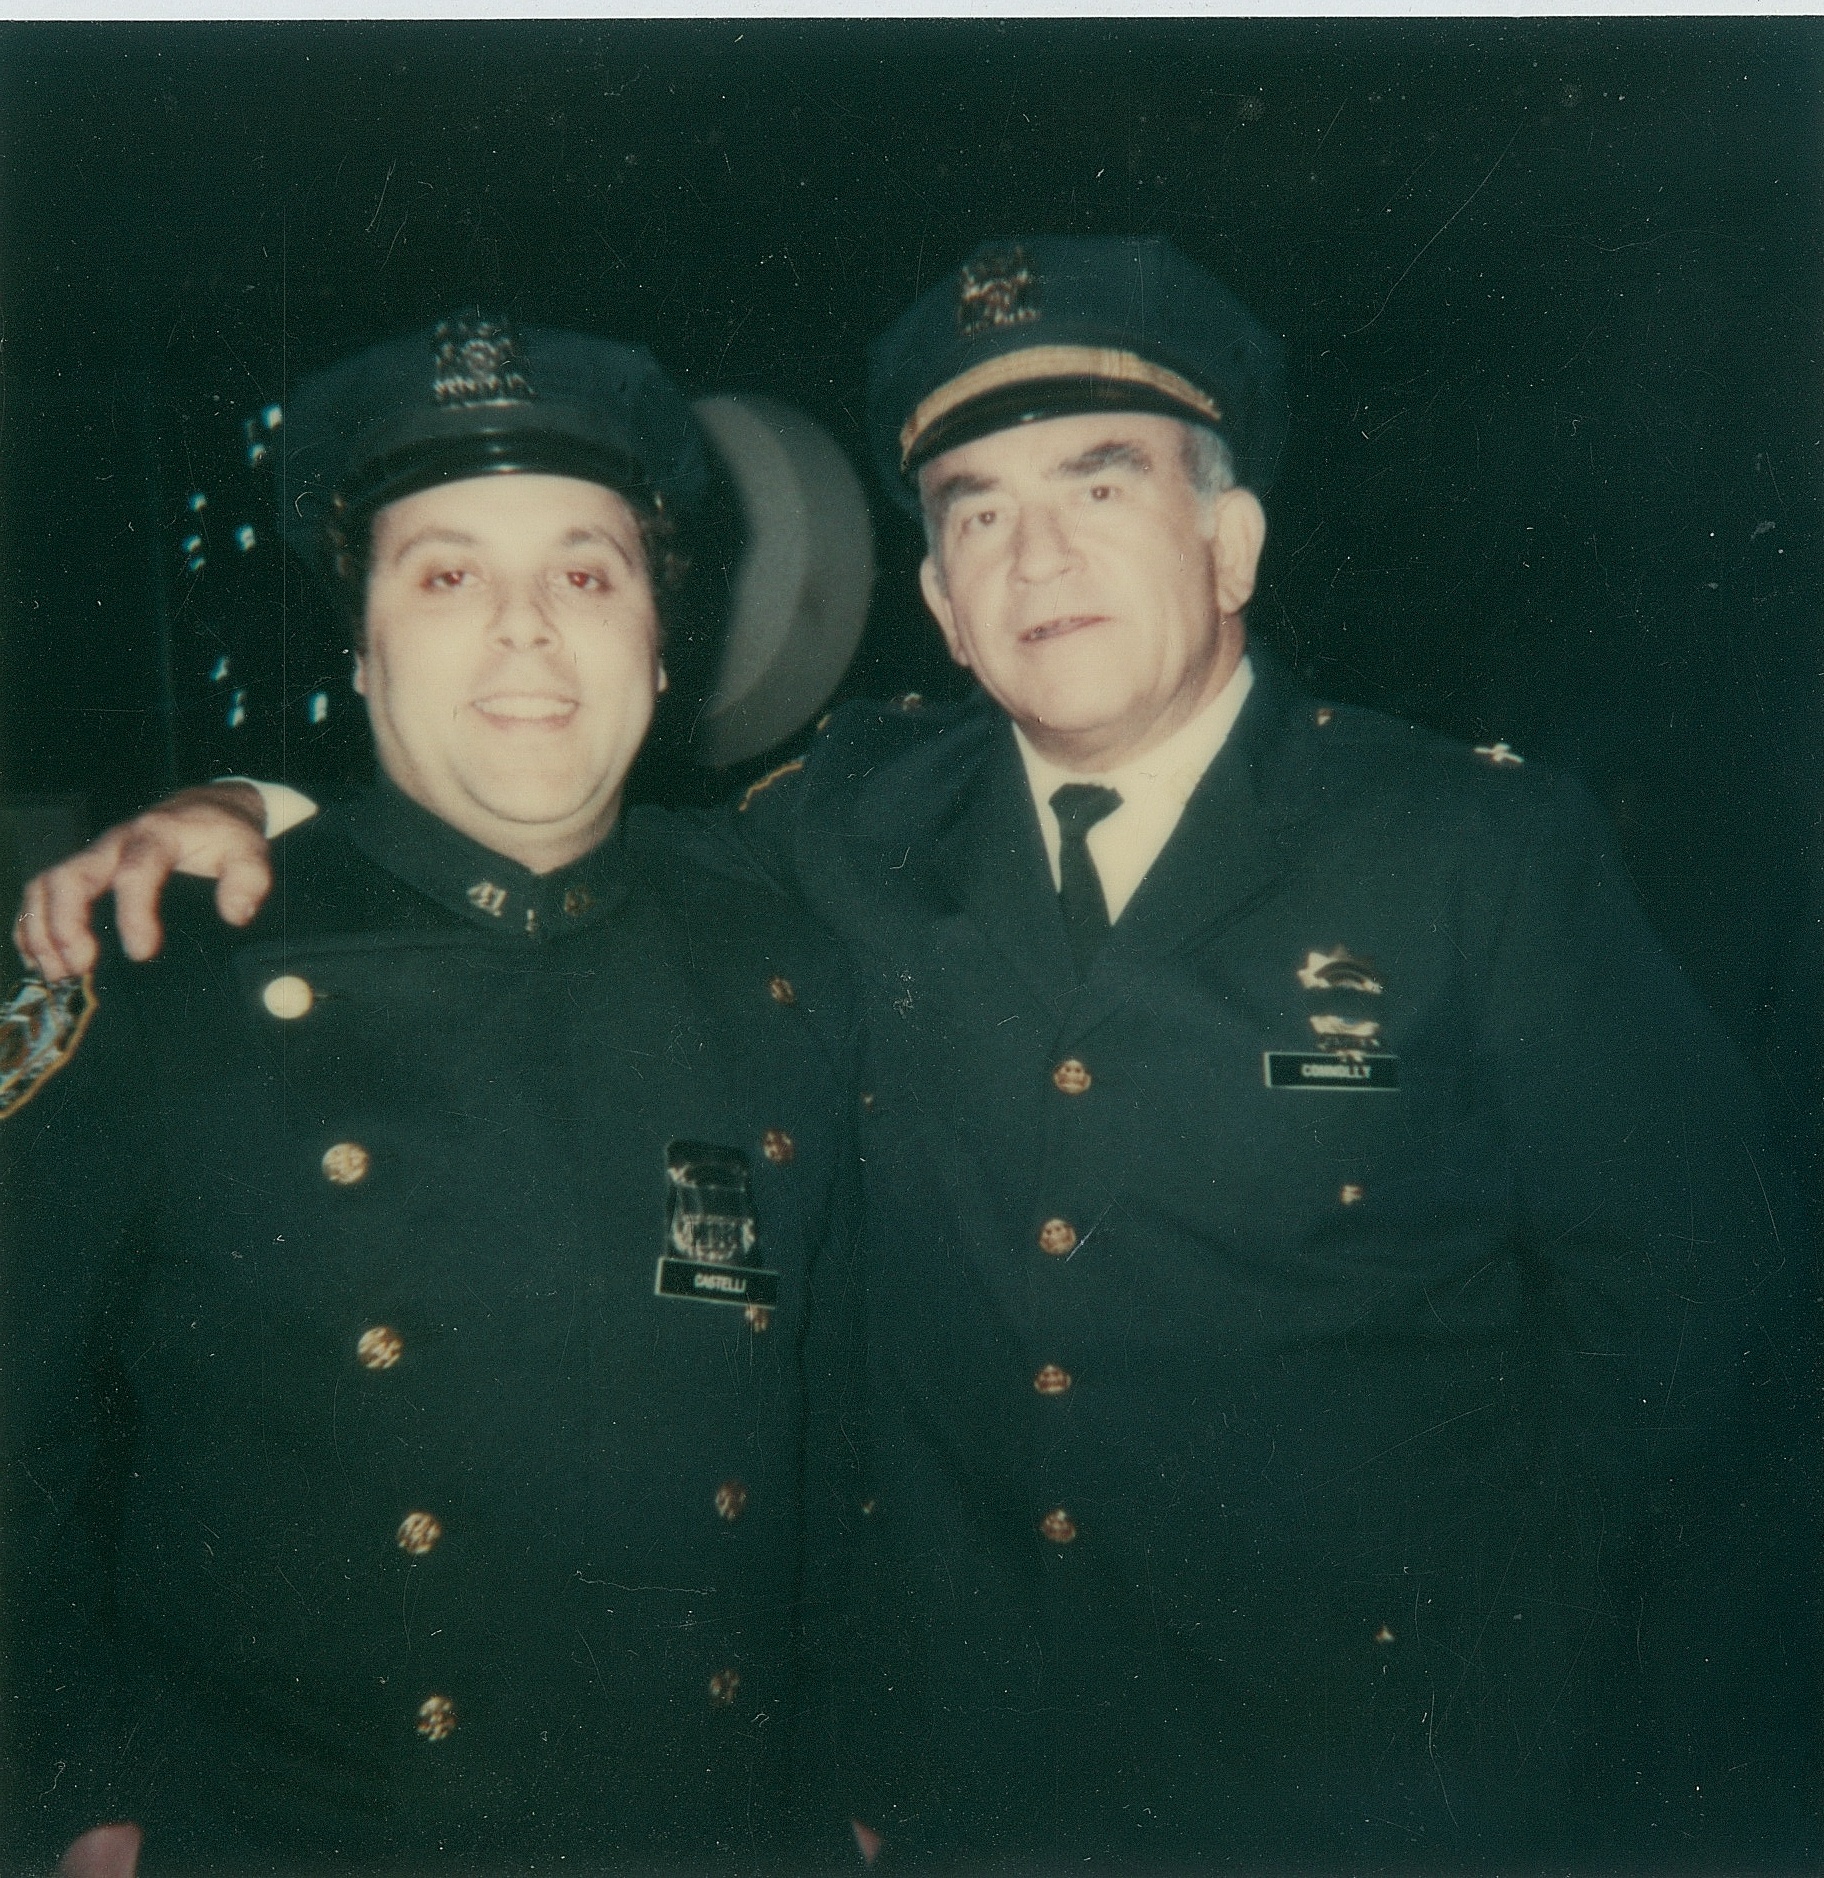 Frank Patton and Ed Asner in 